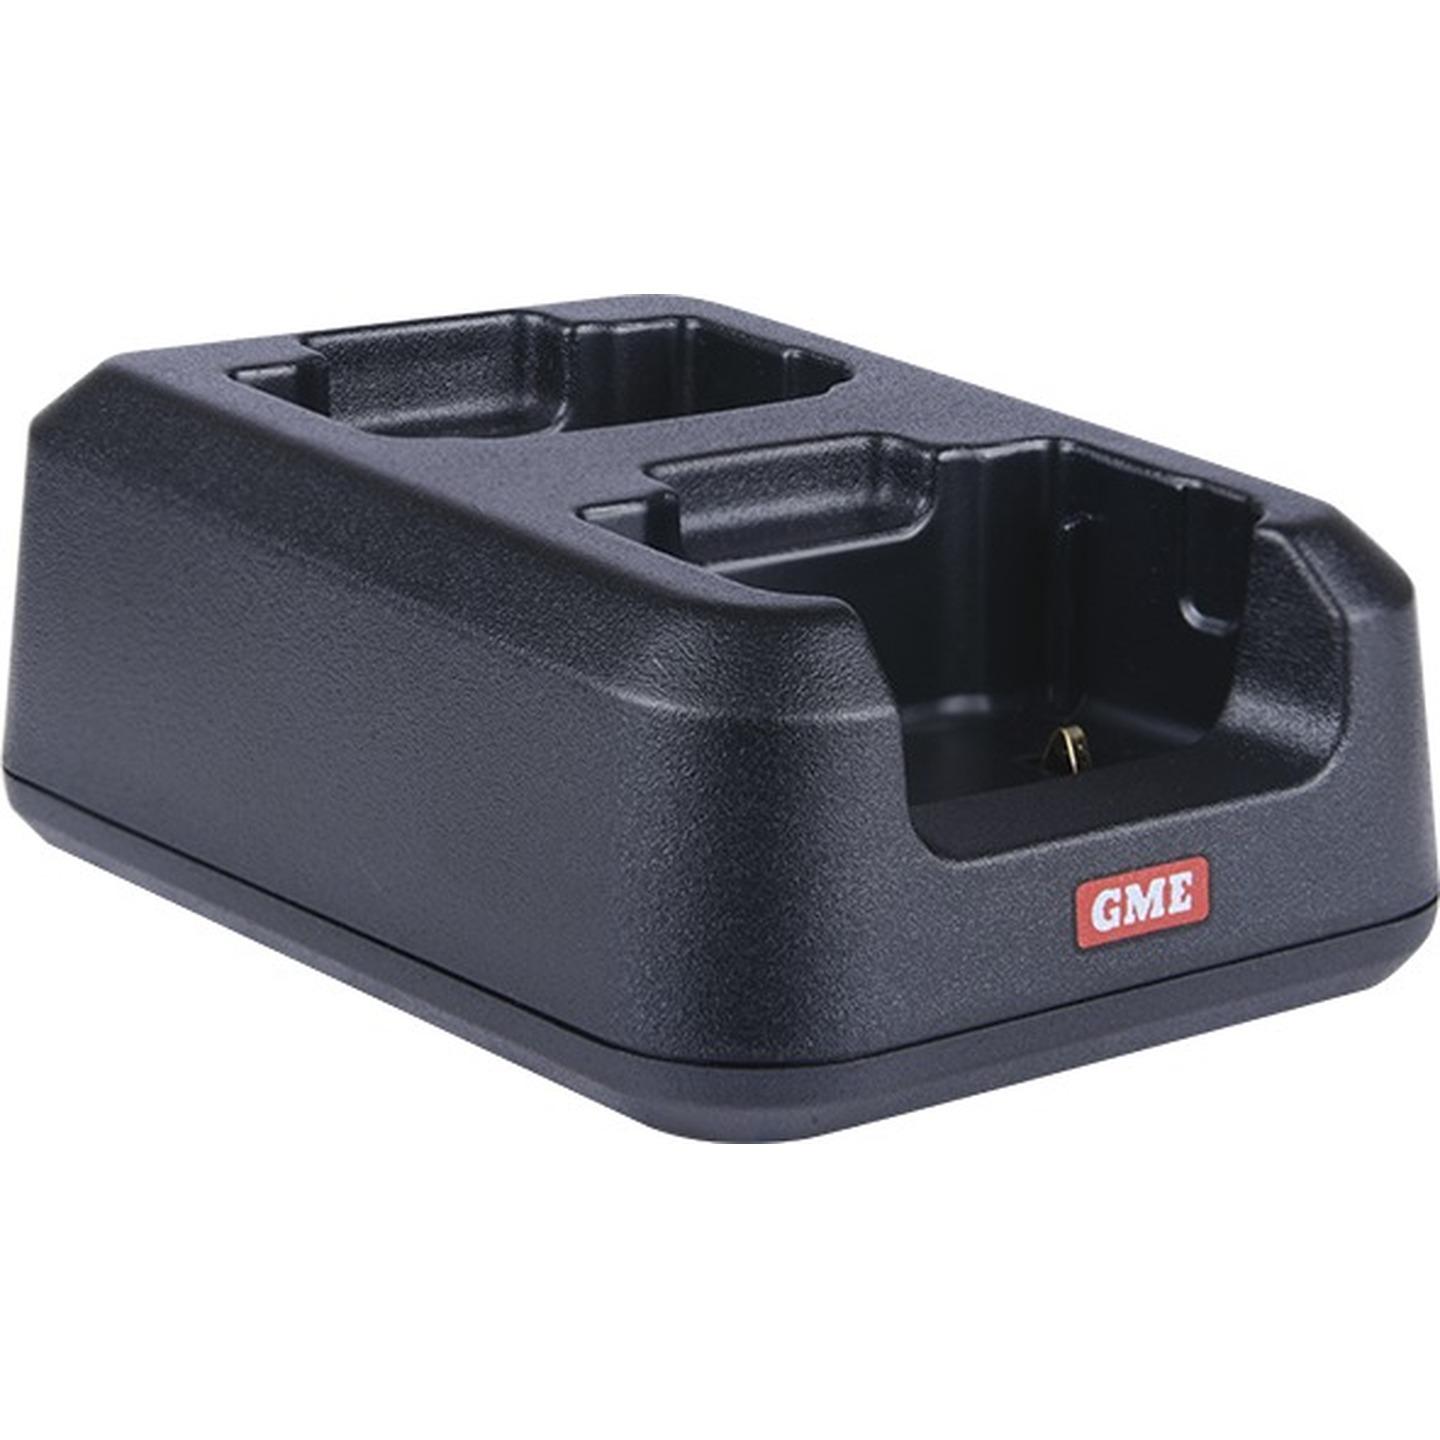 Dual Charging Cradle to suit GME TX6155/6160